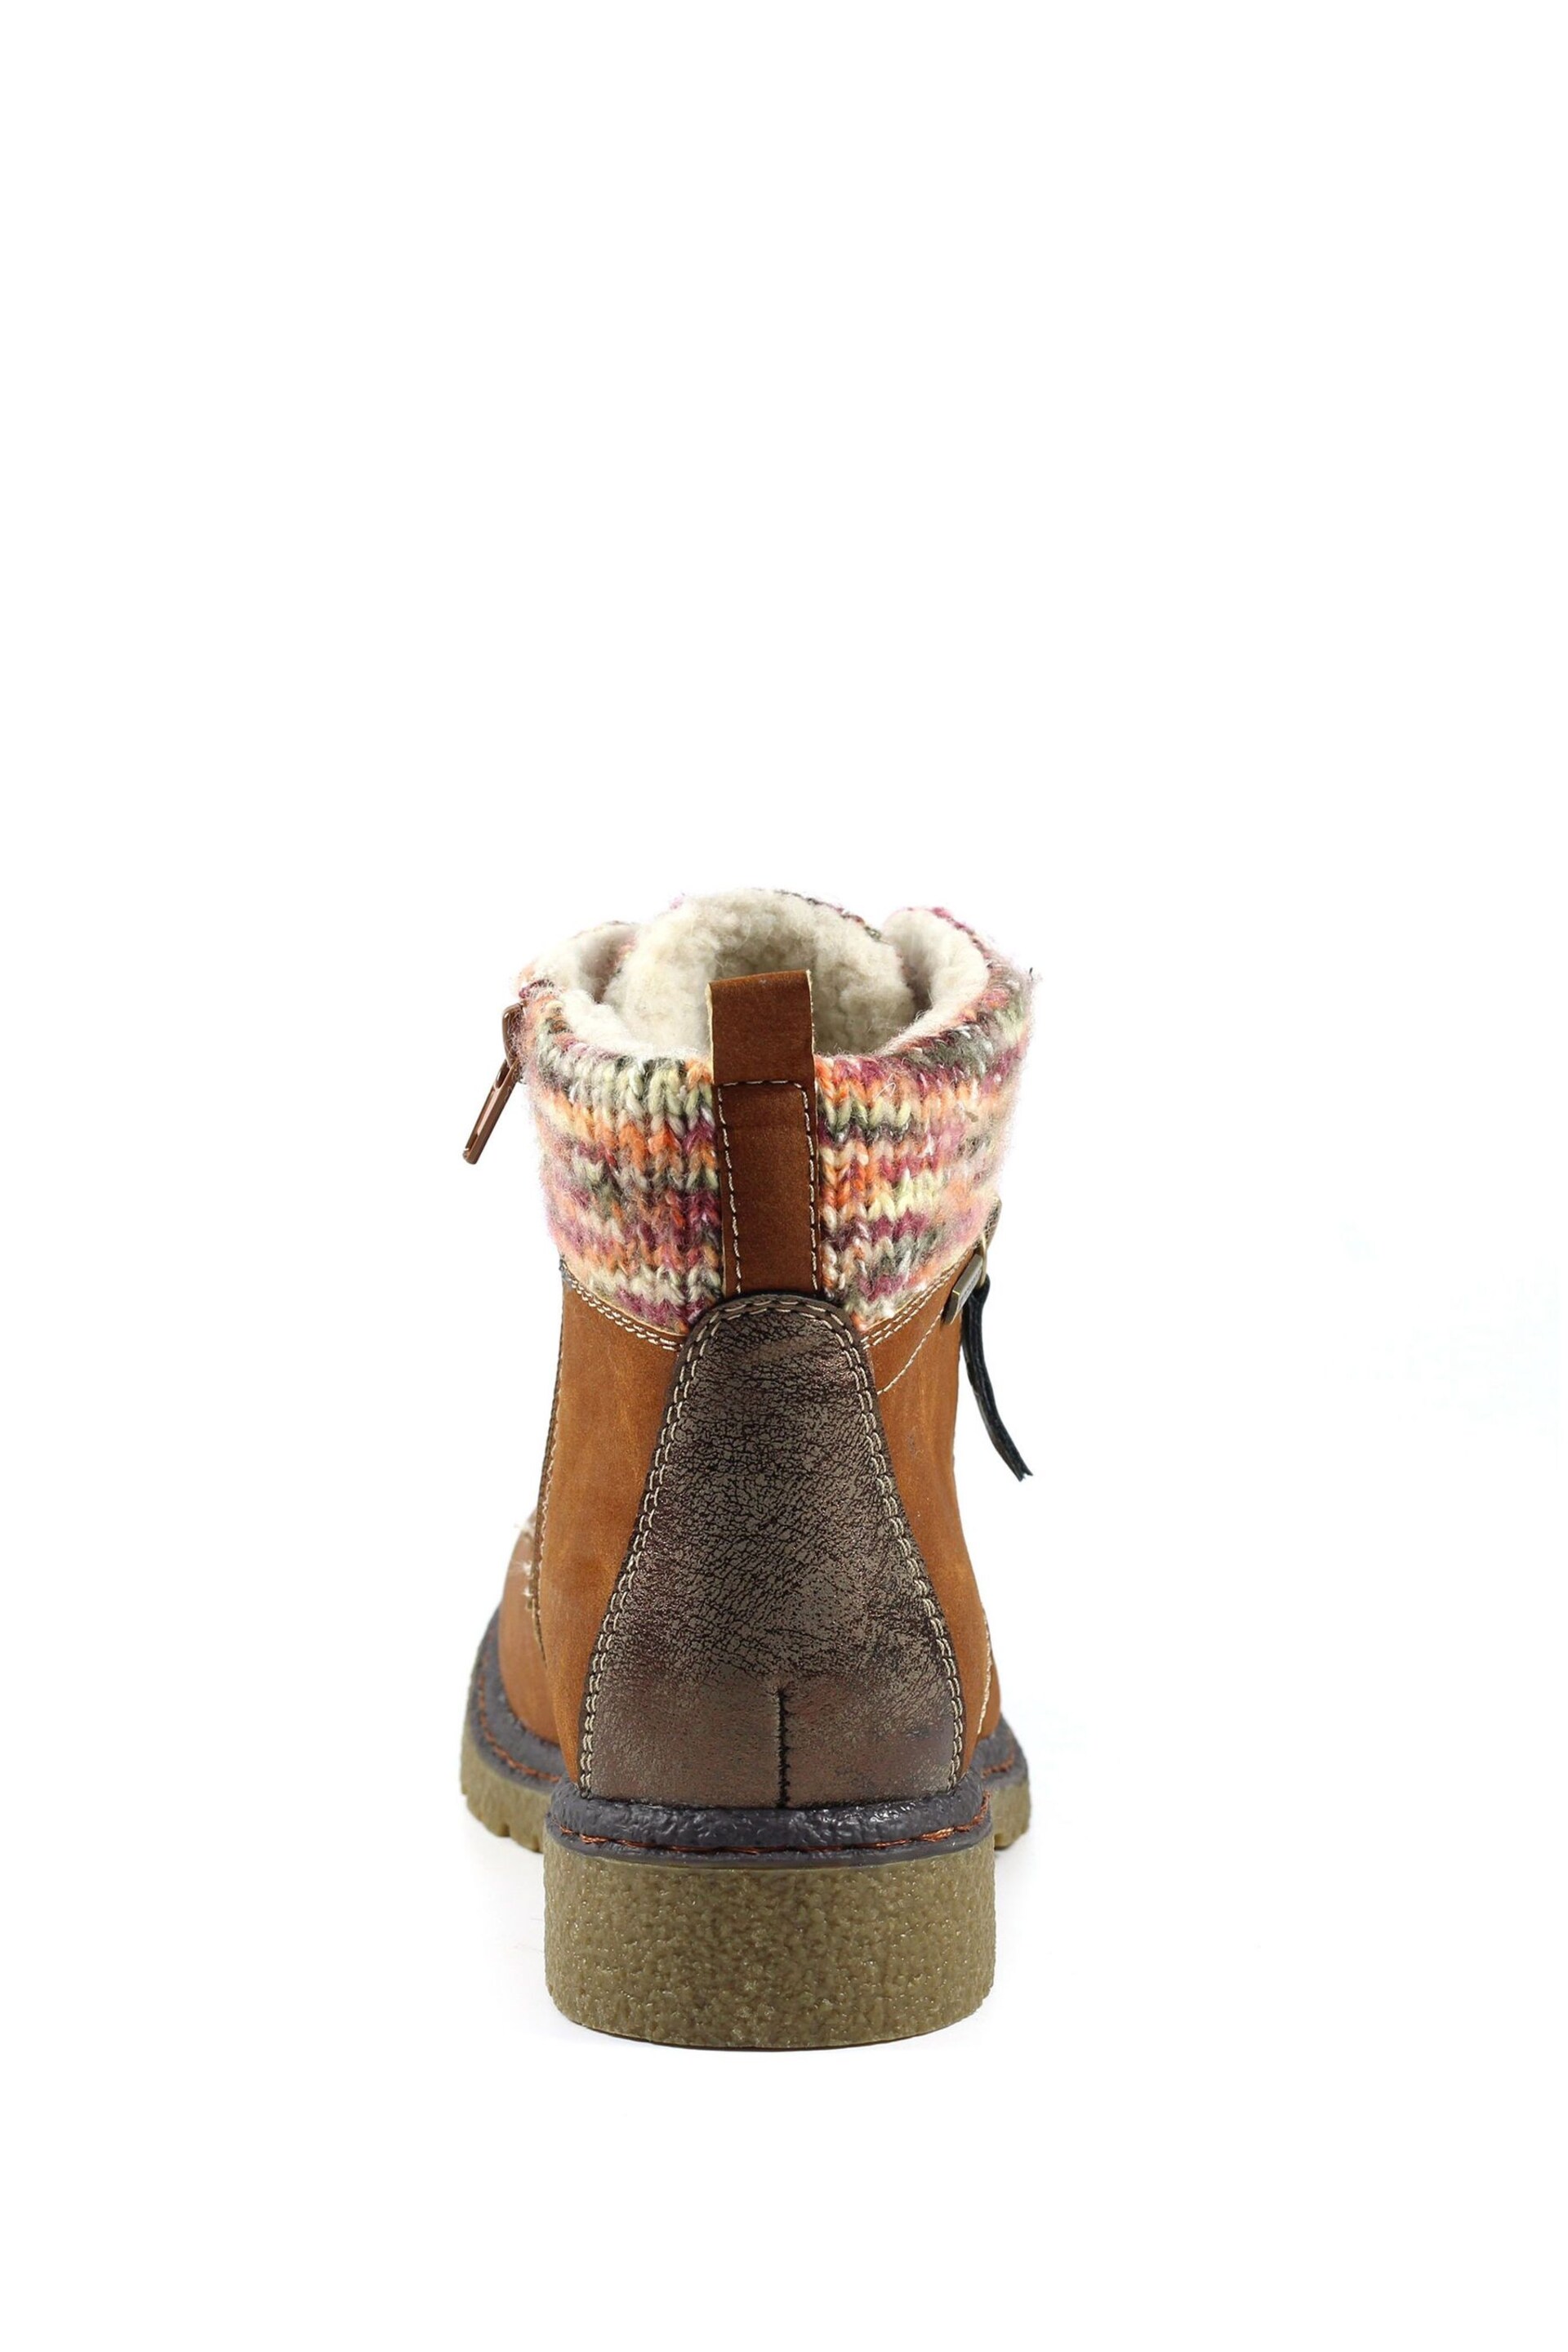 Lunar Jalapeno Waterproof Tan Brown Ankle Boots - Image 4 of 7